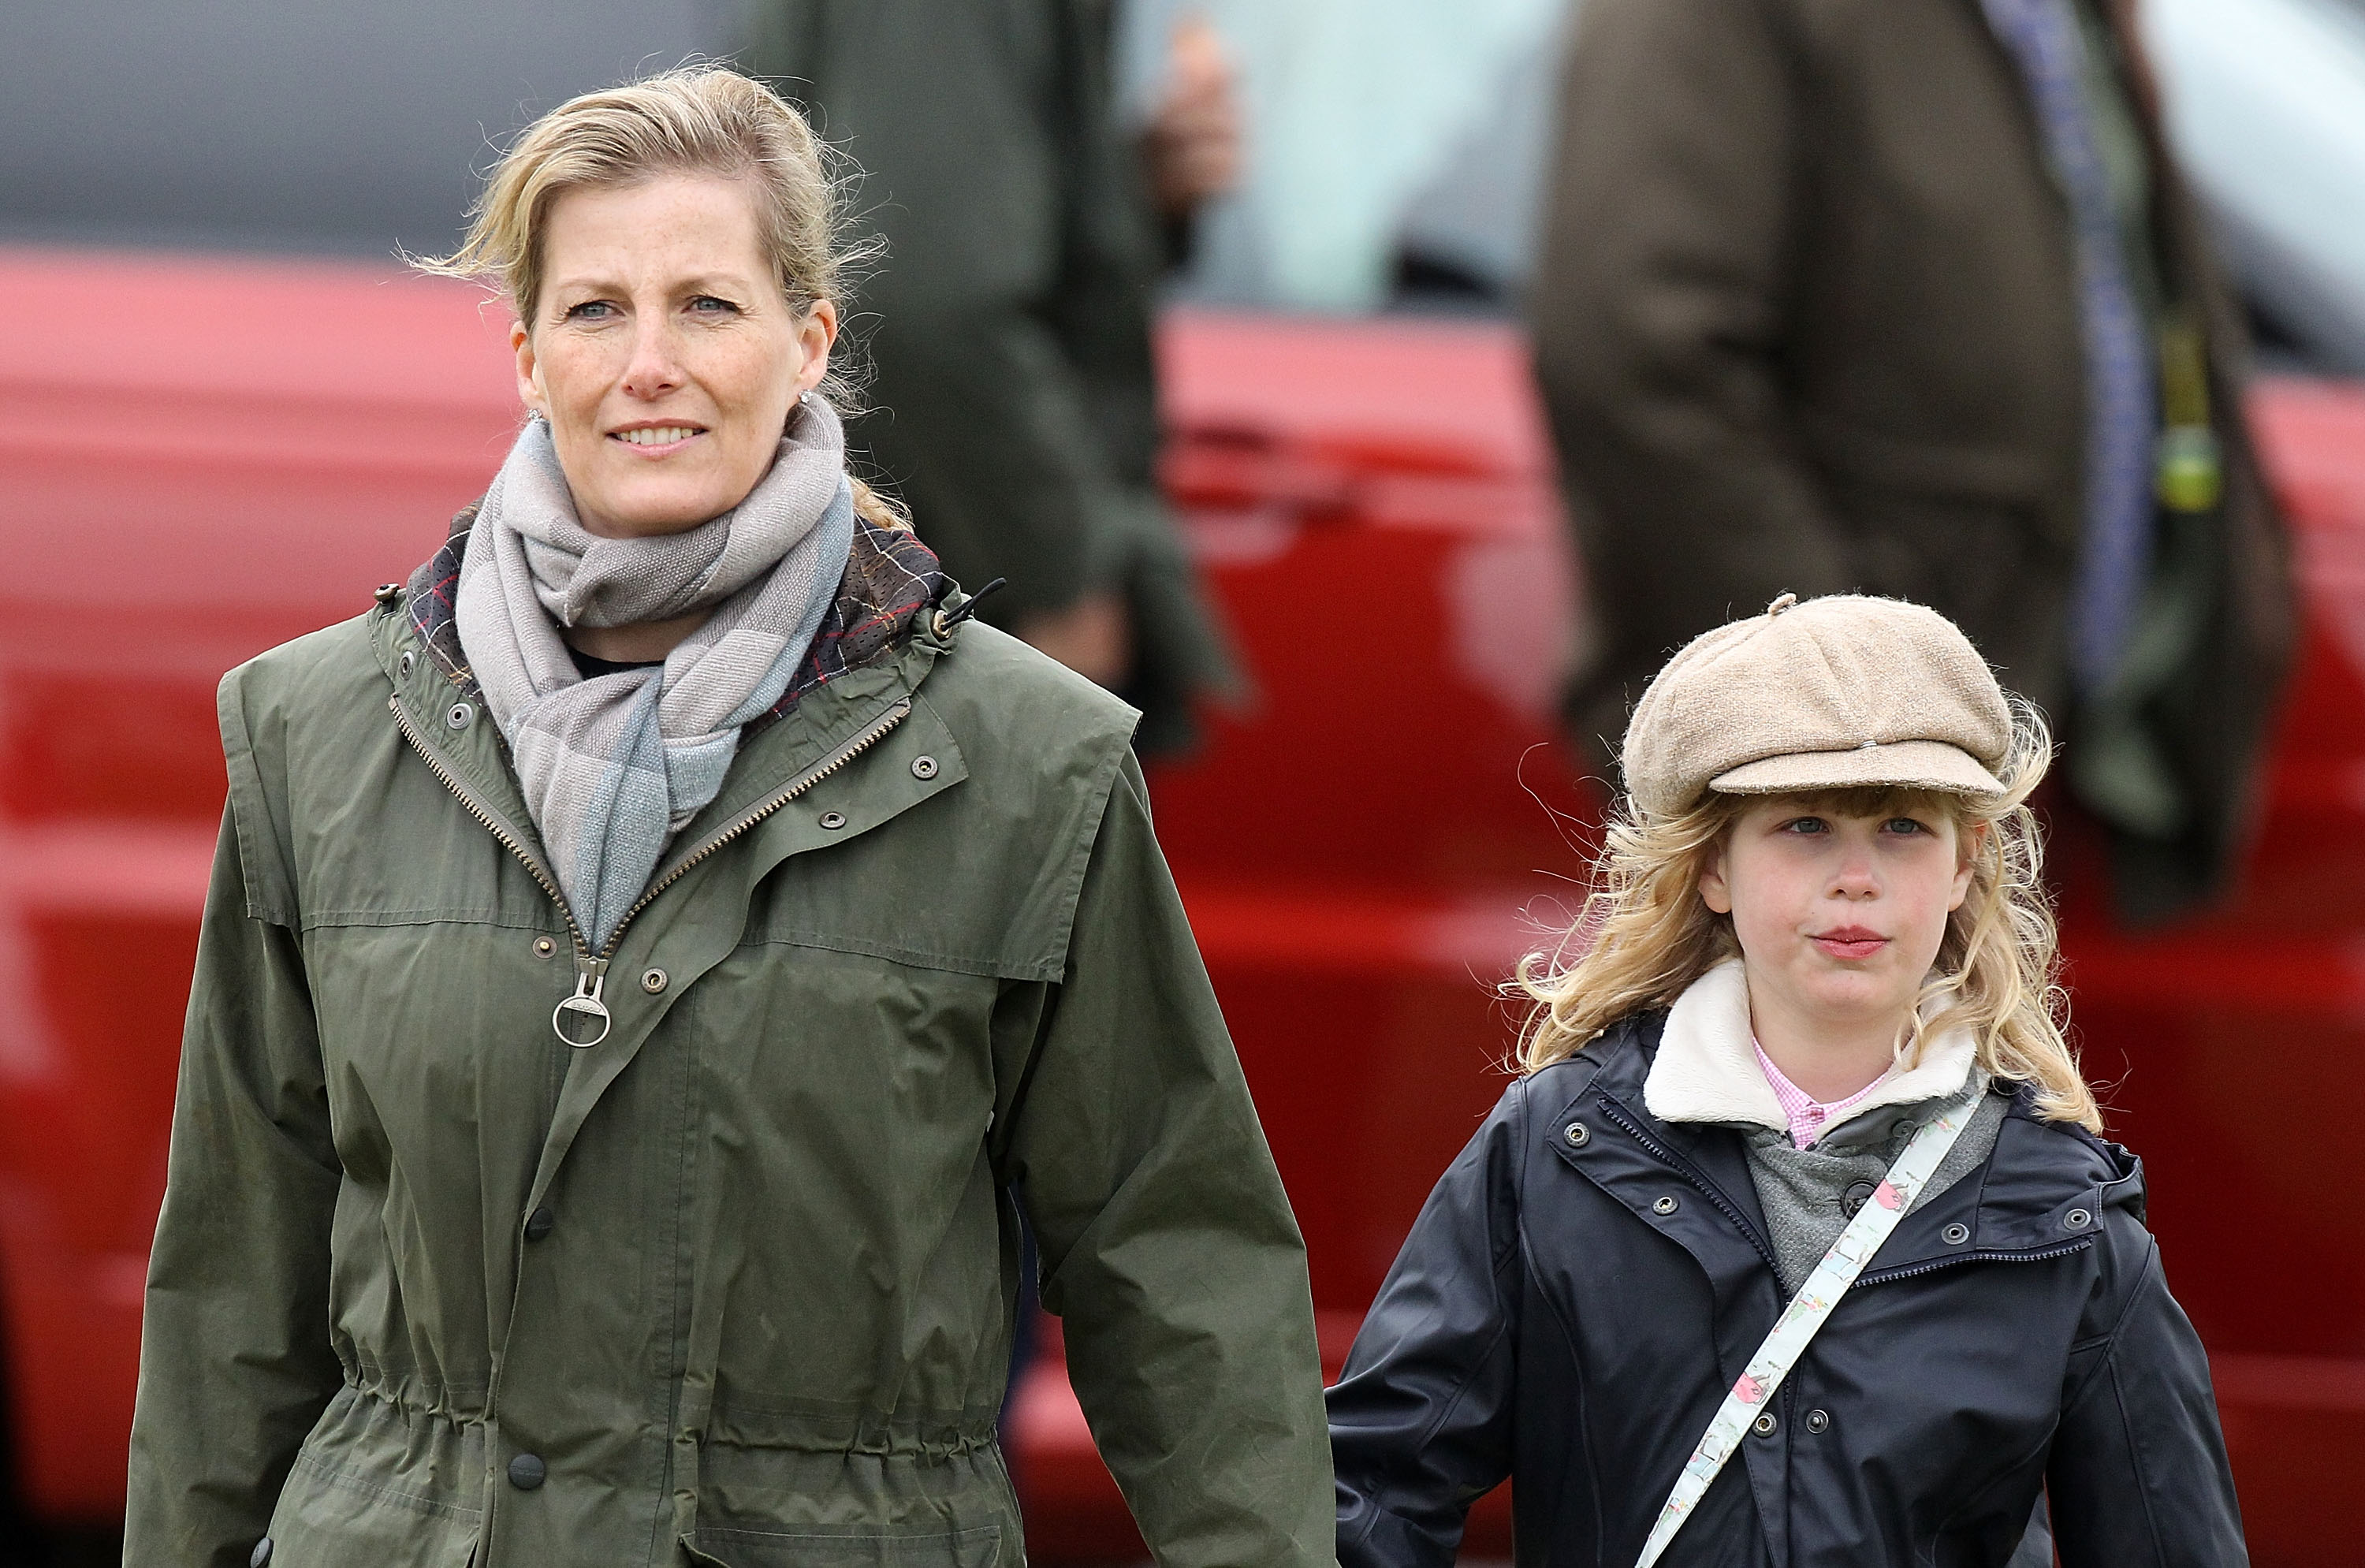 Sophie, Countess of Wessex and her daughter Lady Louise Windsor attending day 4 of the Royal Windsor Horse Show on May 11, 2013 in Windsor, England ┃Source: Getty Images